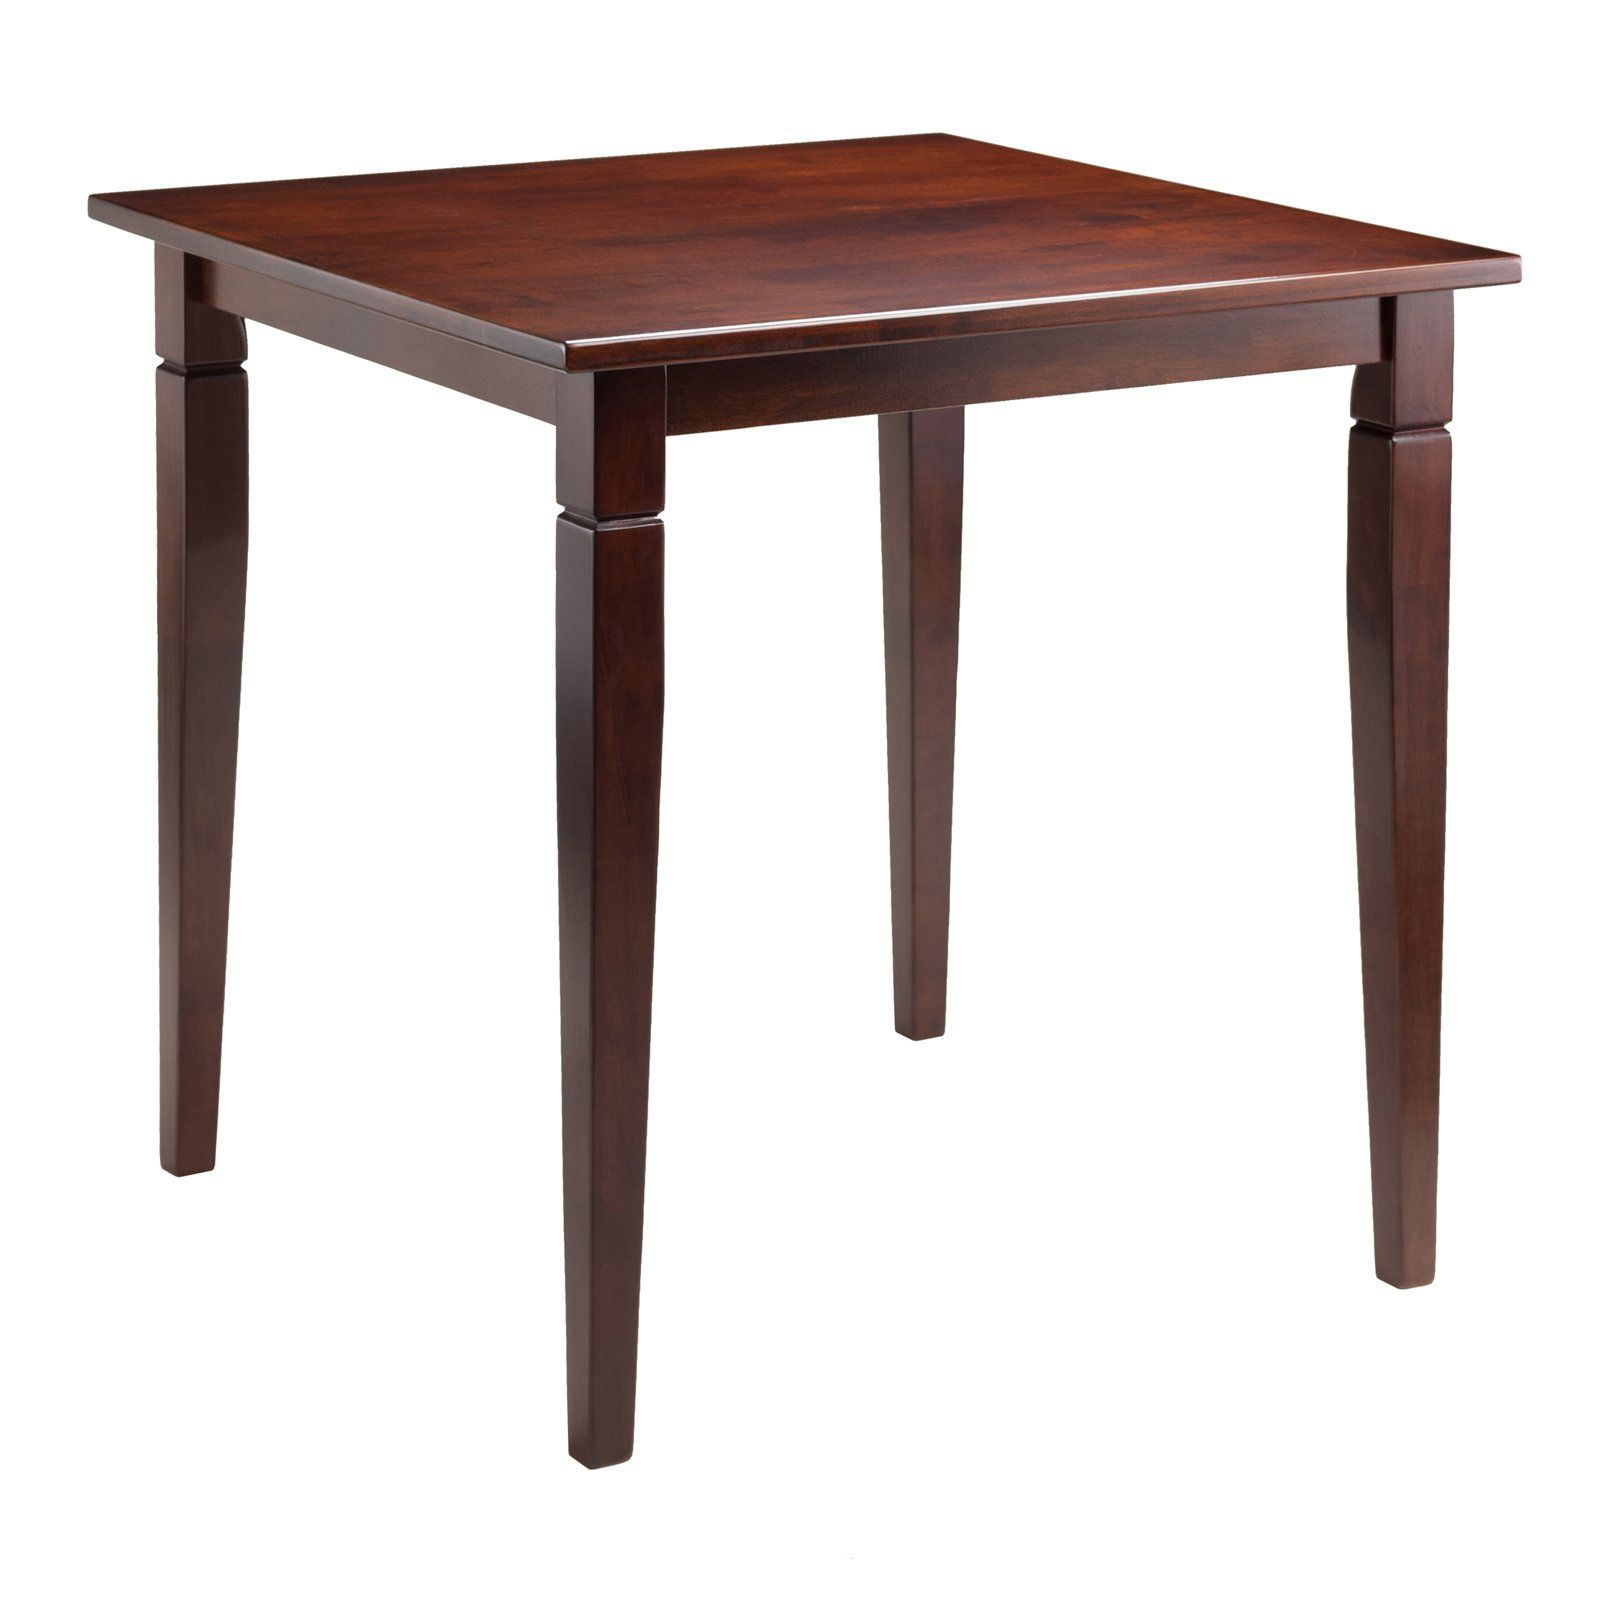 Transitional Antique Walnut Drop Leaf Casual Dining Tables Pertaining To Famous Winsome Wood Kingsgate Dining Table With Tapered Legs, Walnut – Walmart (View 30 of 30)